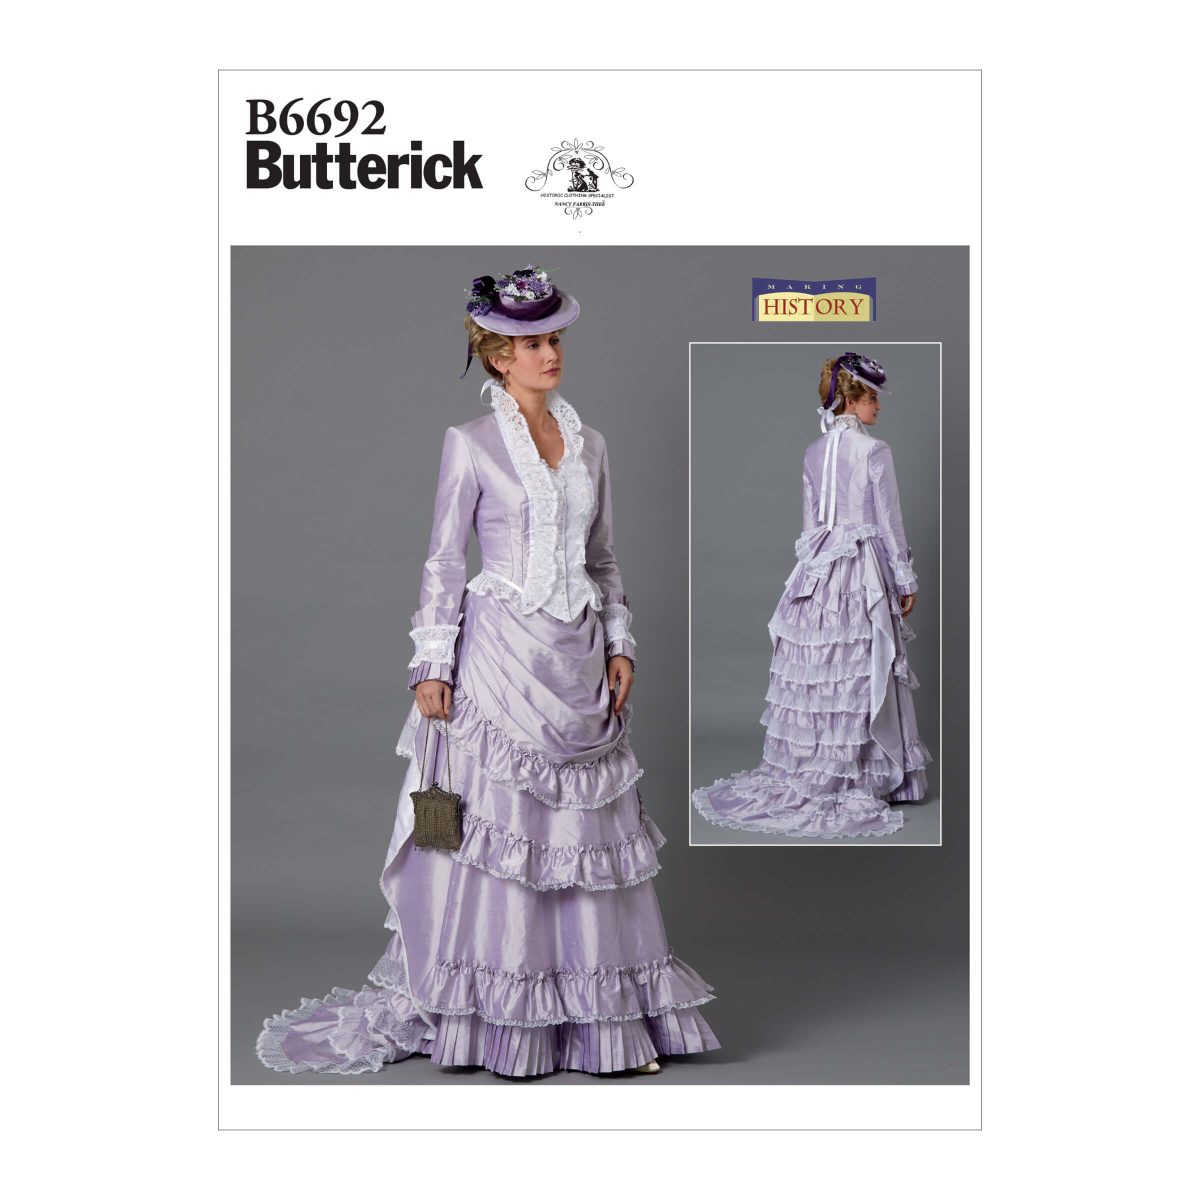 Butterick Sewing Pattern B6692 Misses' Costume